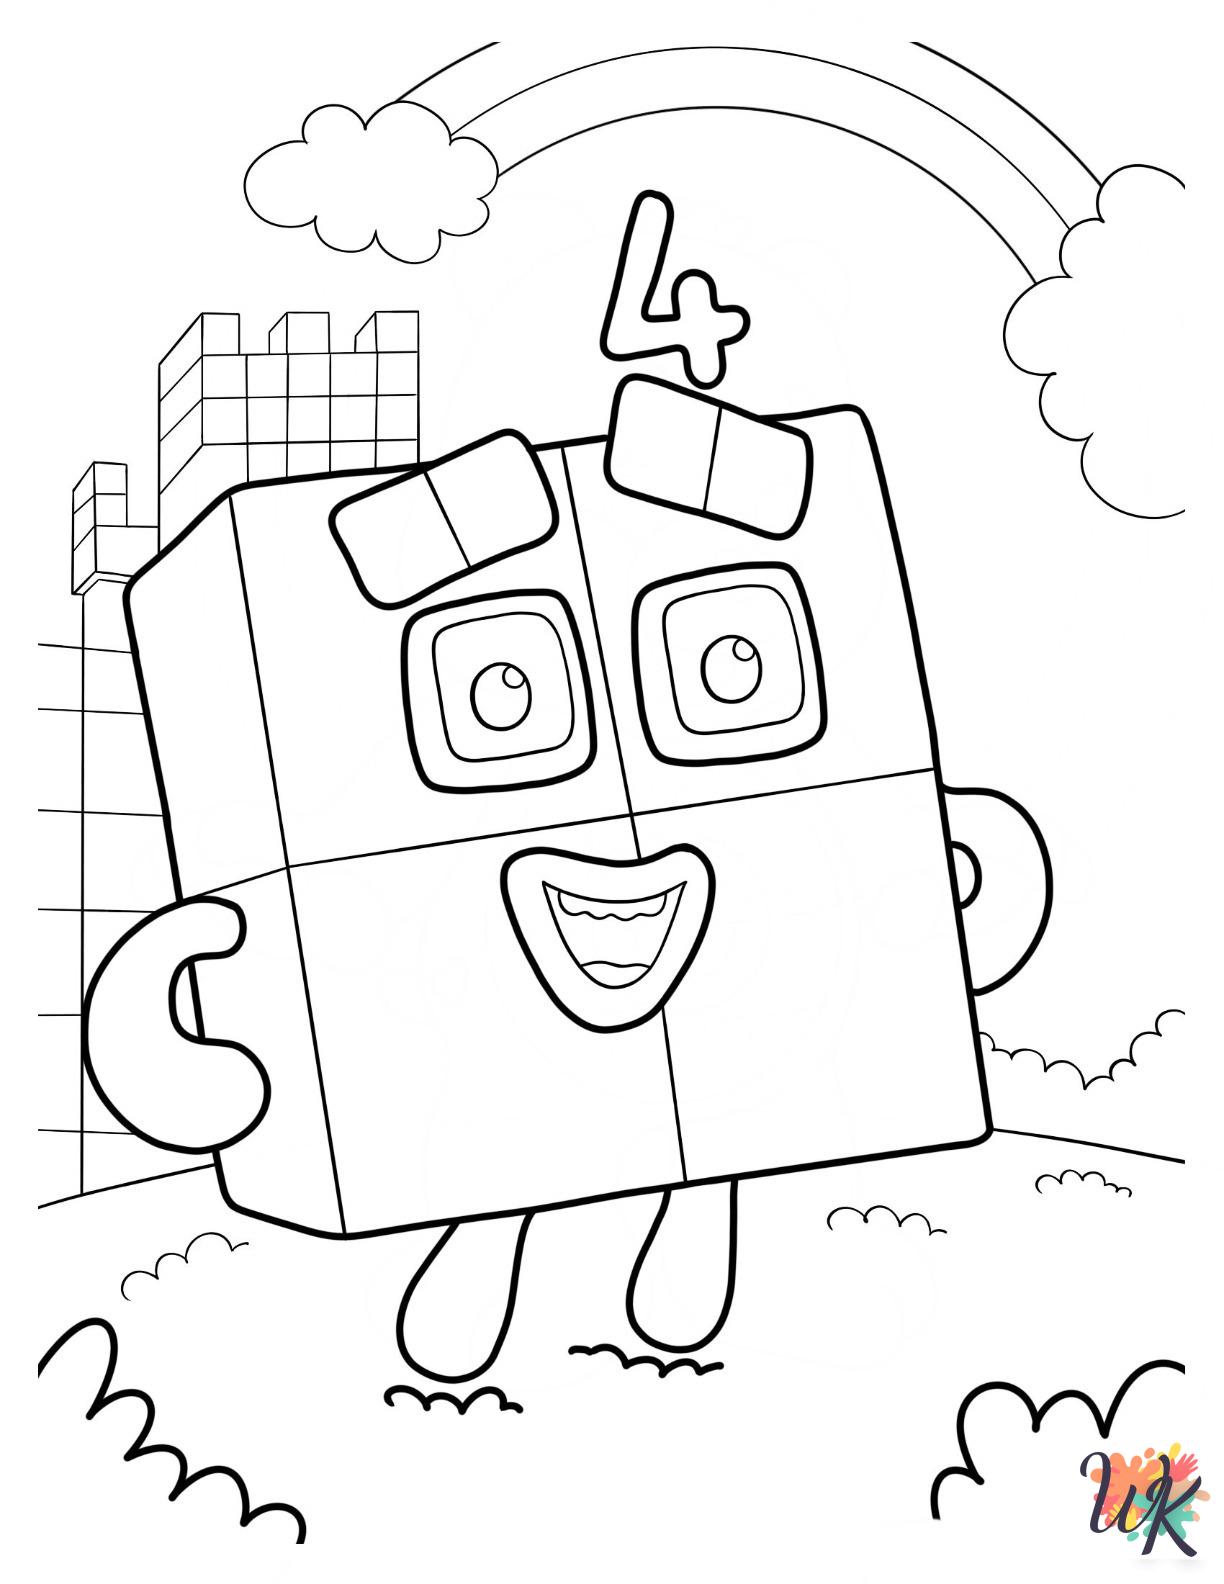 free Numberblocks coloring pages for adults